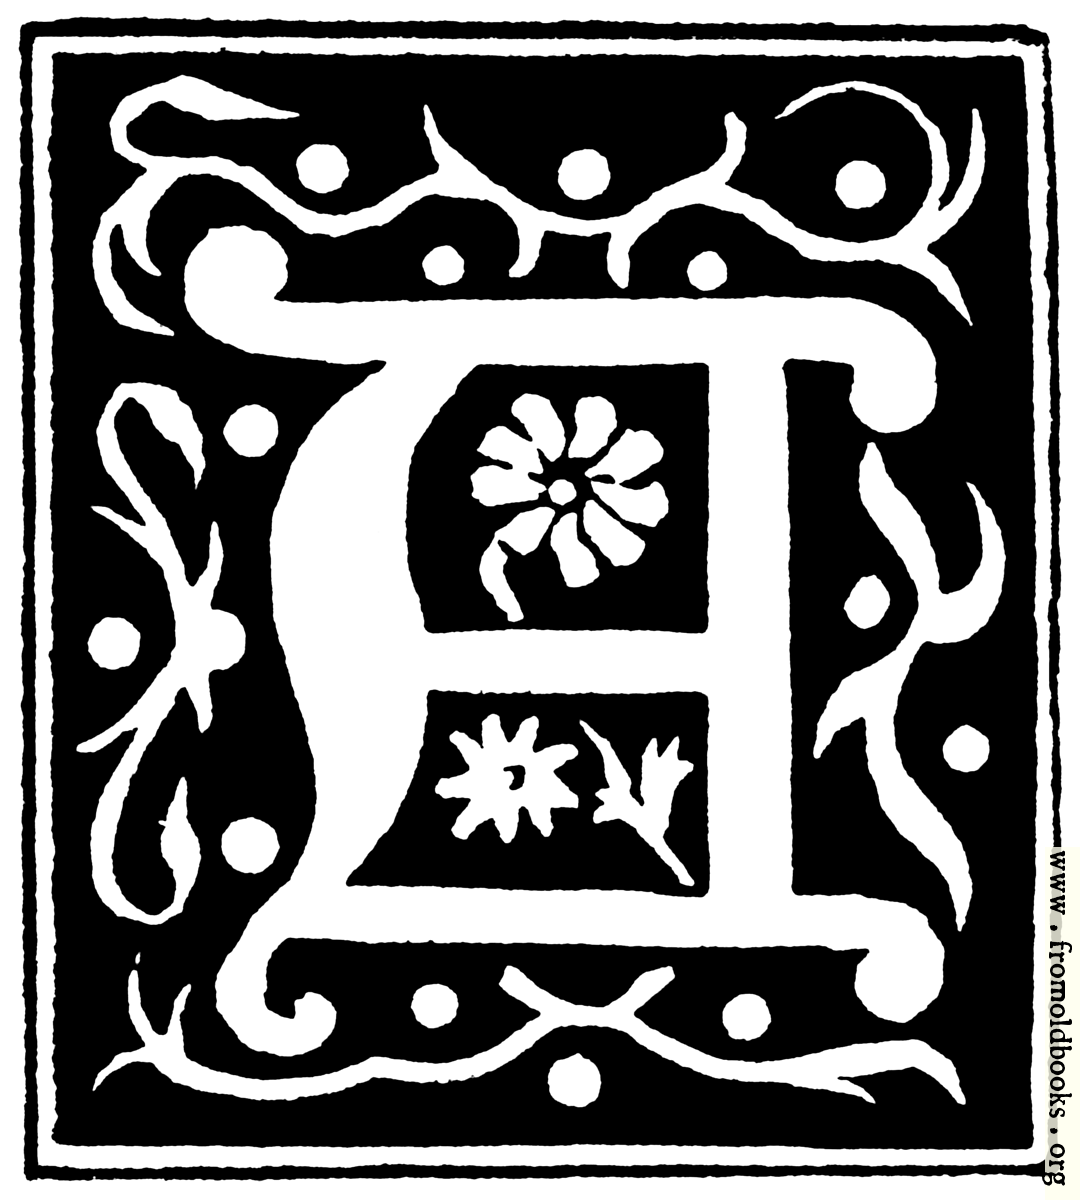 [Picture: Decorative initial letter “A” from 16th Century]